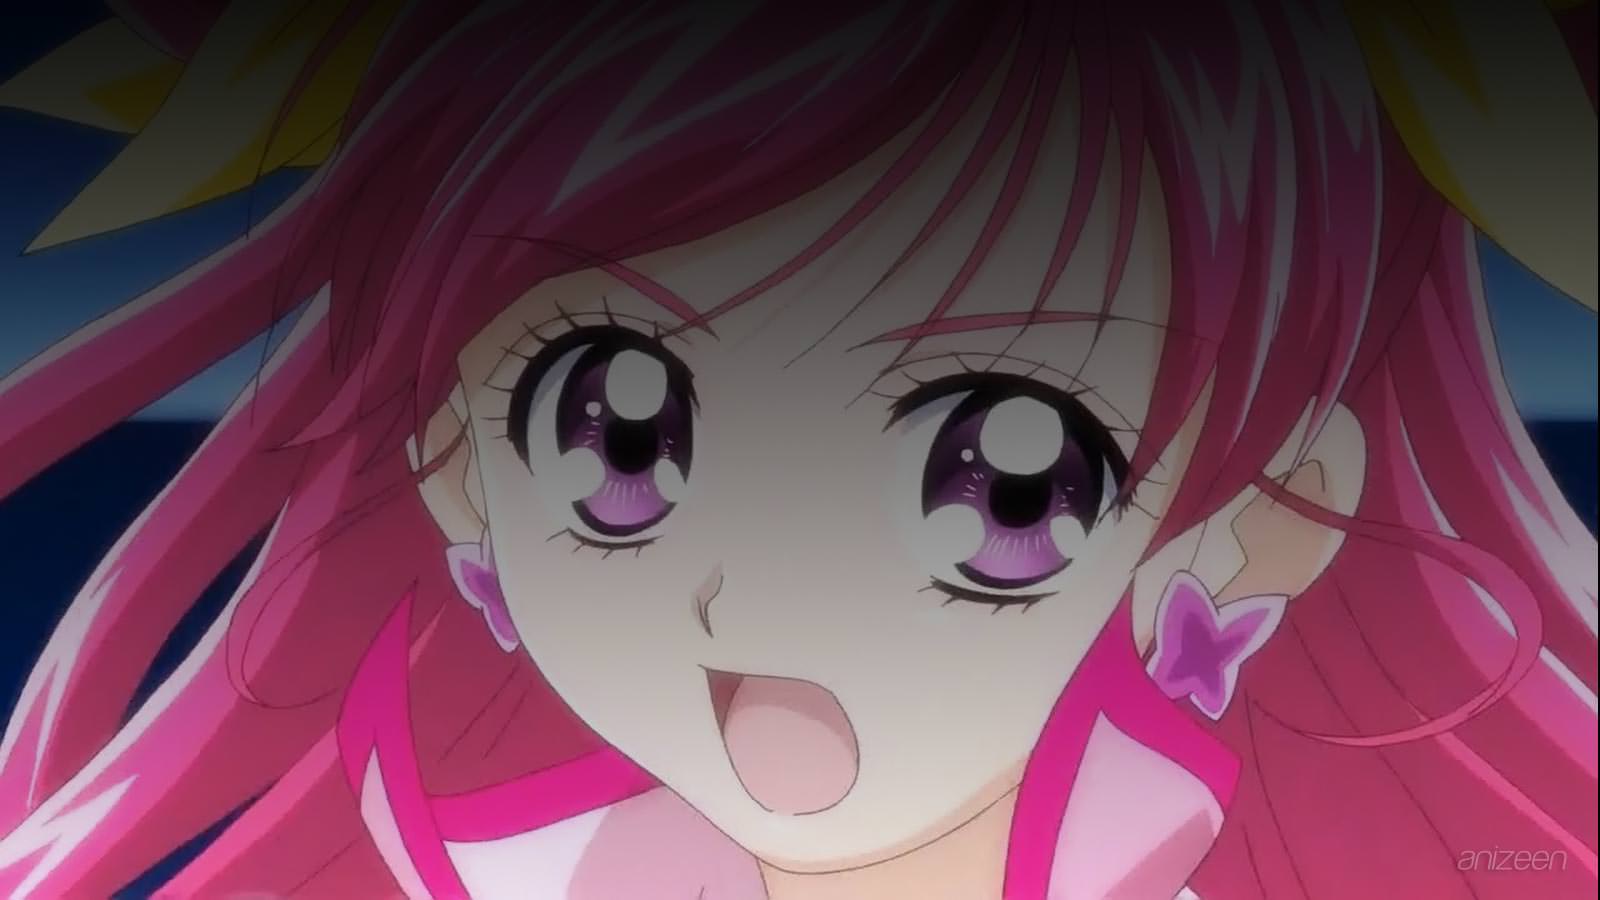 Yes Precure 5 anime